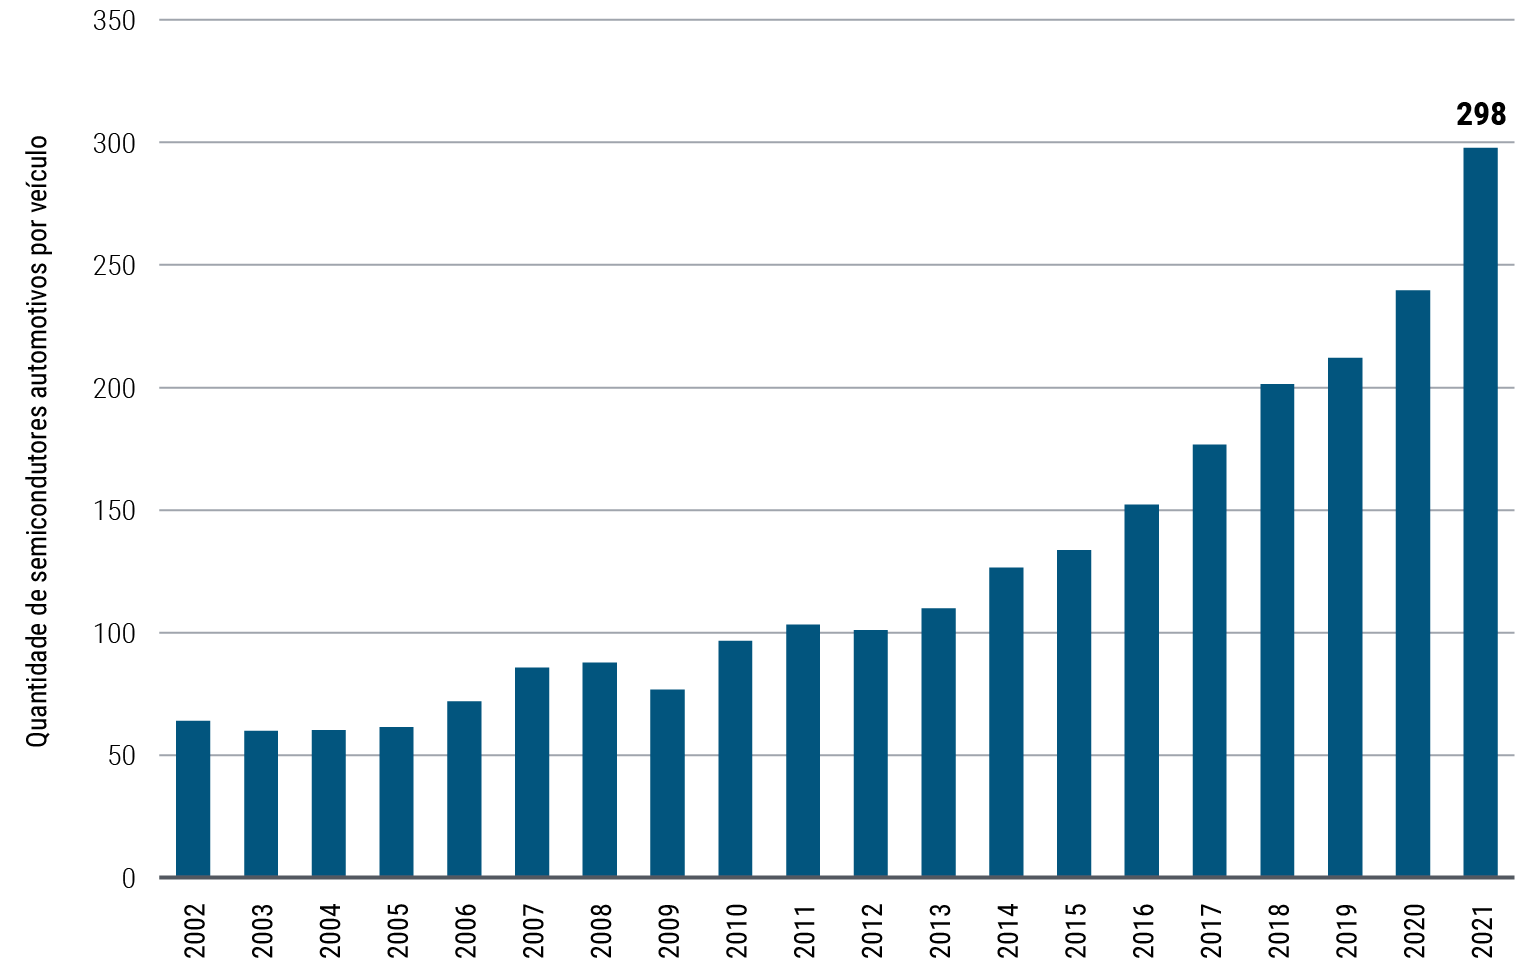 Figure 2 is a bar chart showing the annual average number of automotive semiconductors per vehicle from 2002 to 2021. Over that time frame, the number has risen from 64 to 298, with the largest one-year increase between 2020 and 2021. Units reflect global shipments of automotive microprocessors and automotive analog semiconductors divided by global production of light vehicles. 2021 data reflects first three quarters annualized.